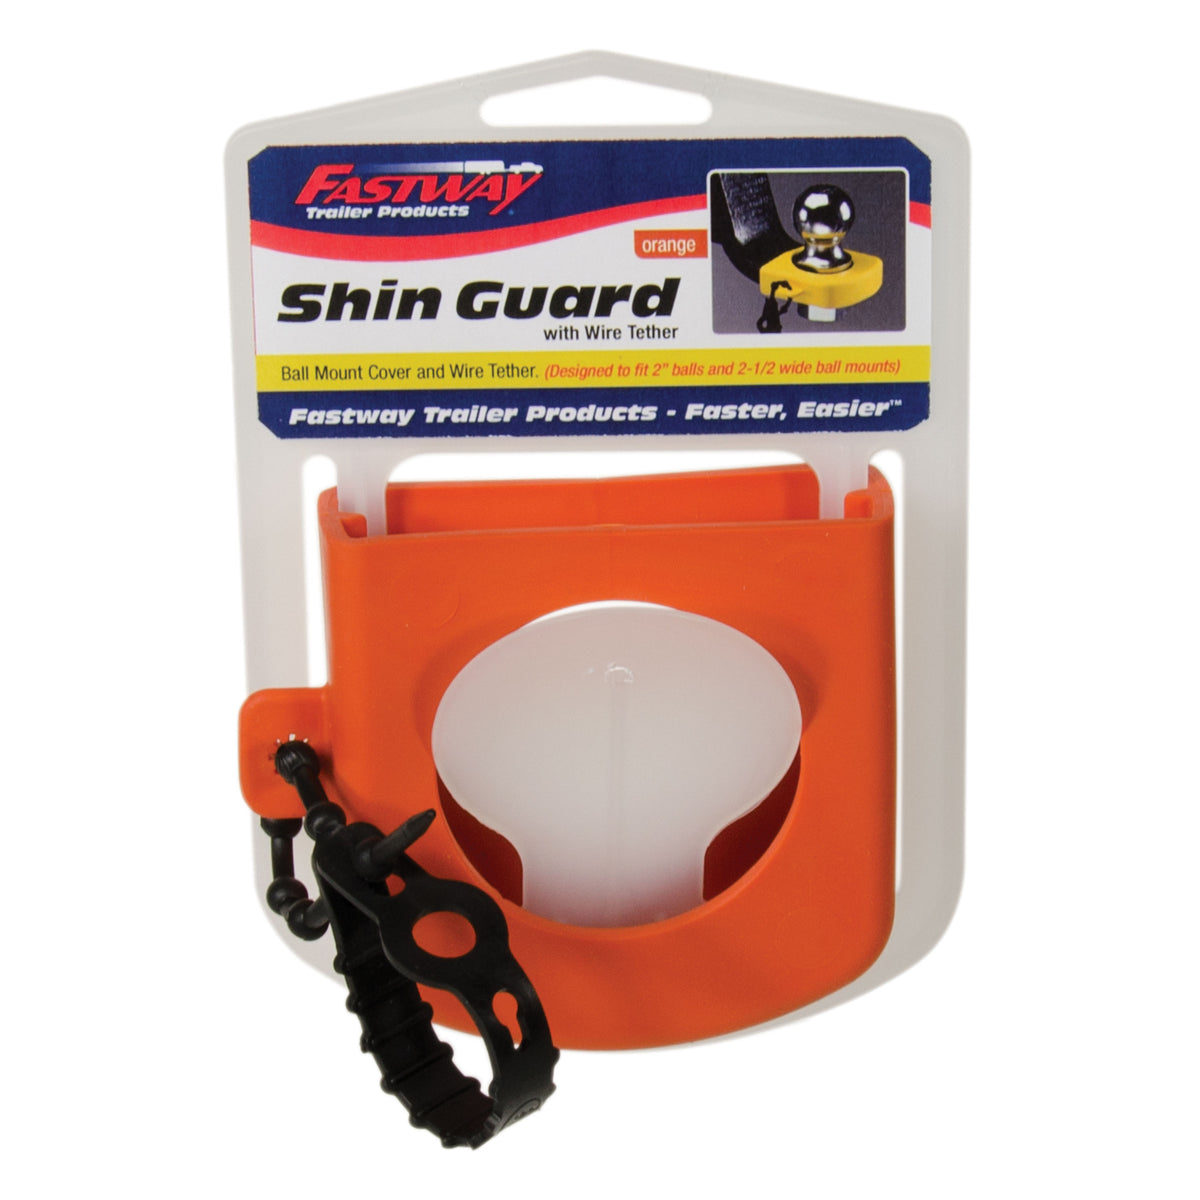 Fastway 82-00-3126 Shin Guard Safety Cover - Orange